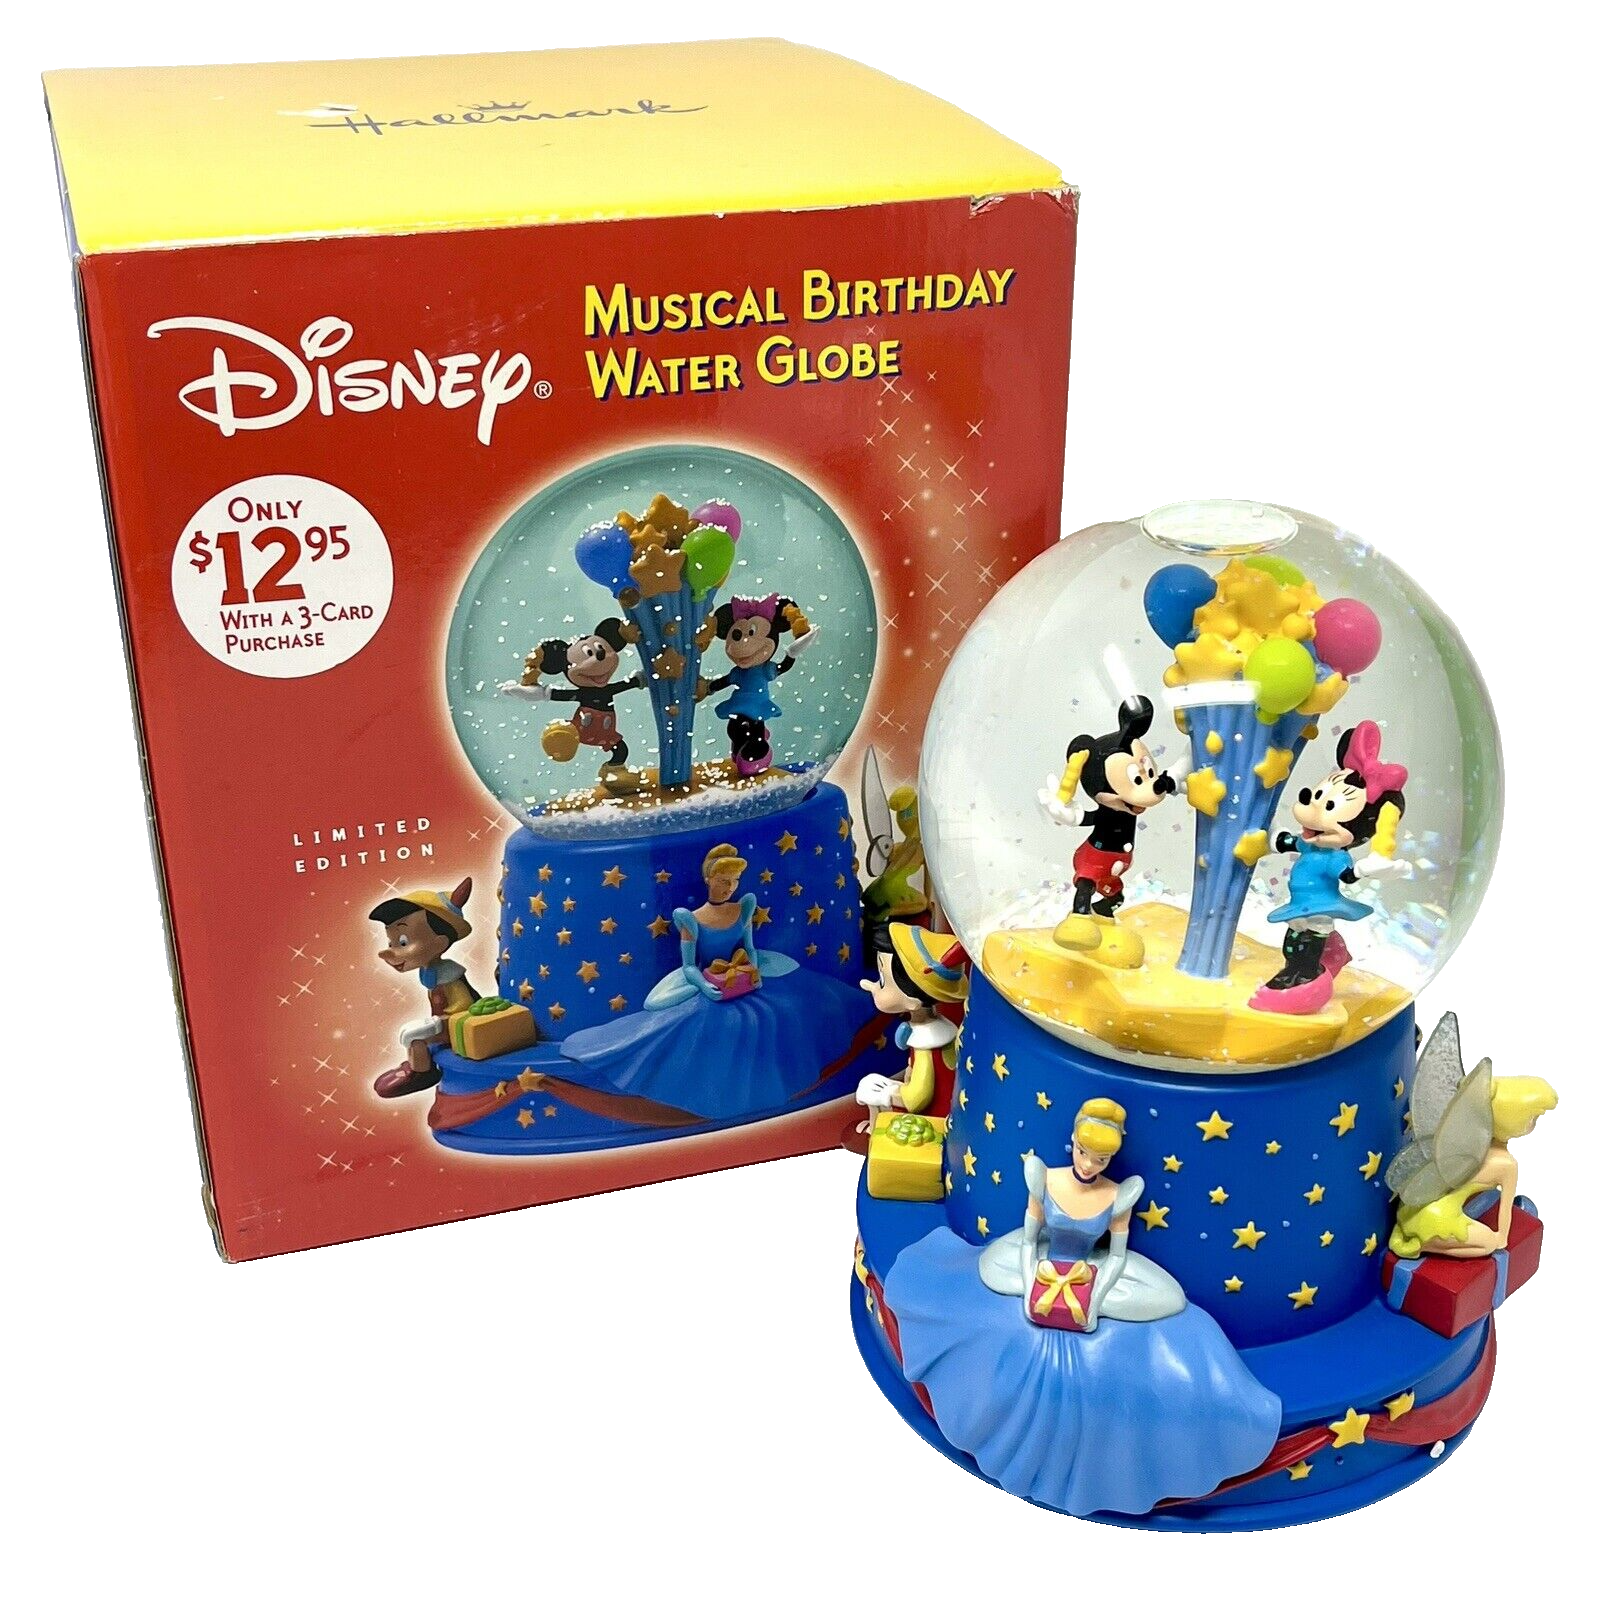 Primary image for Disney's Musical Birthday Water Globe Limited Edition 2001